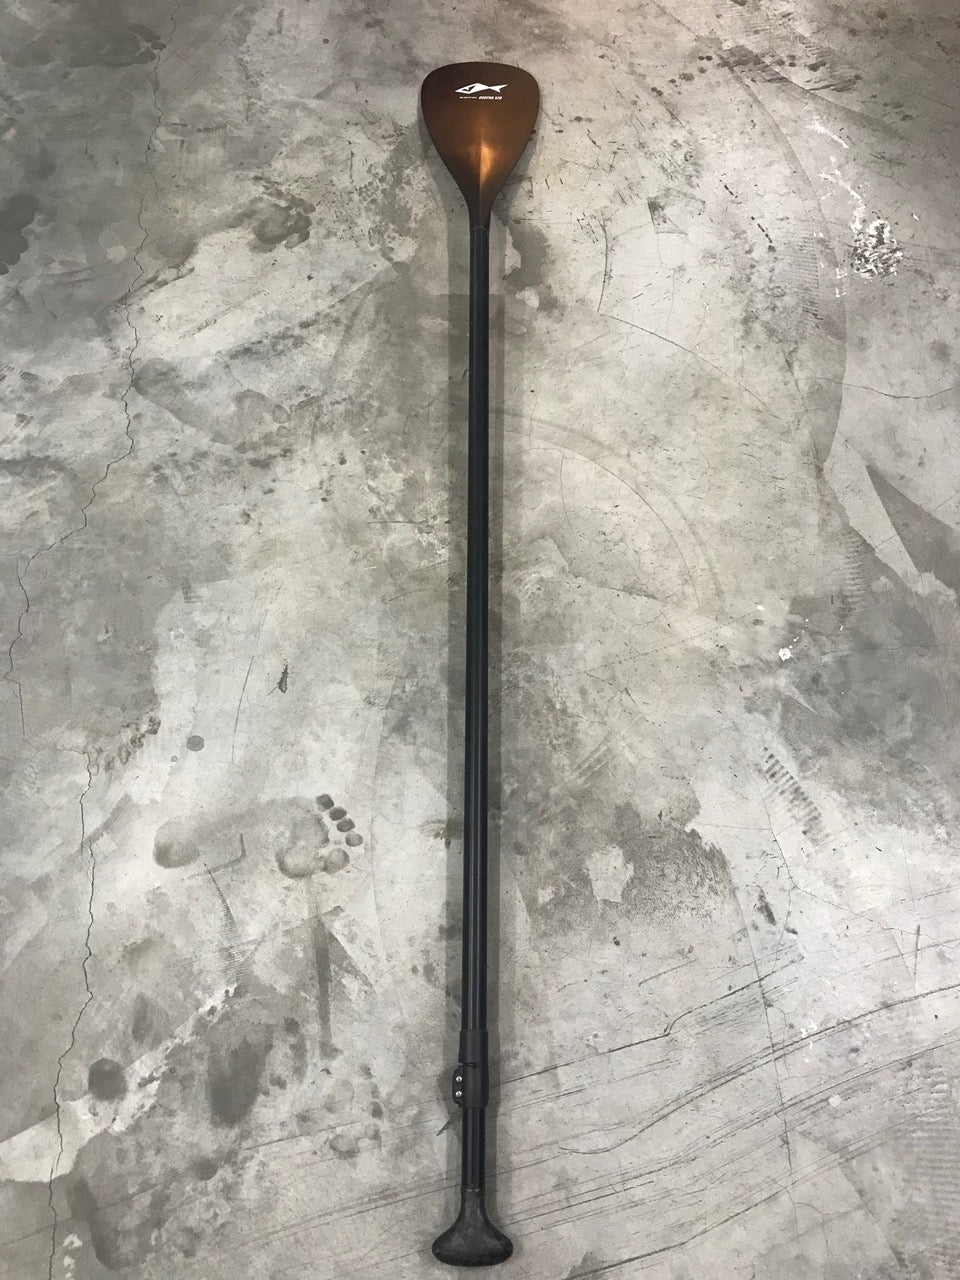 full shot of a 3 piece carbon paddle